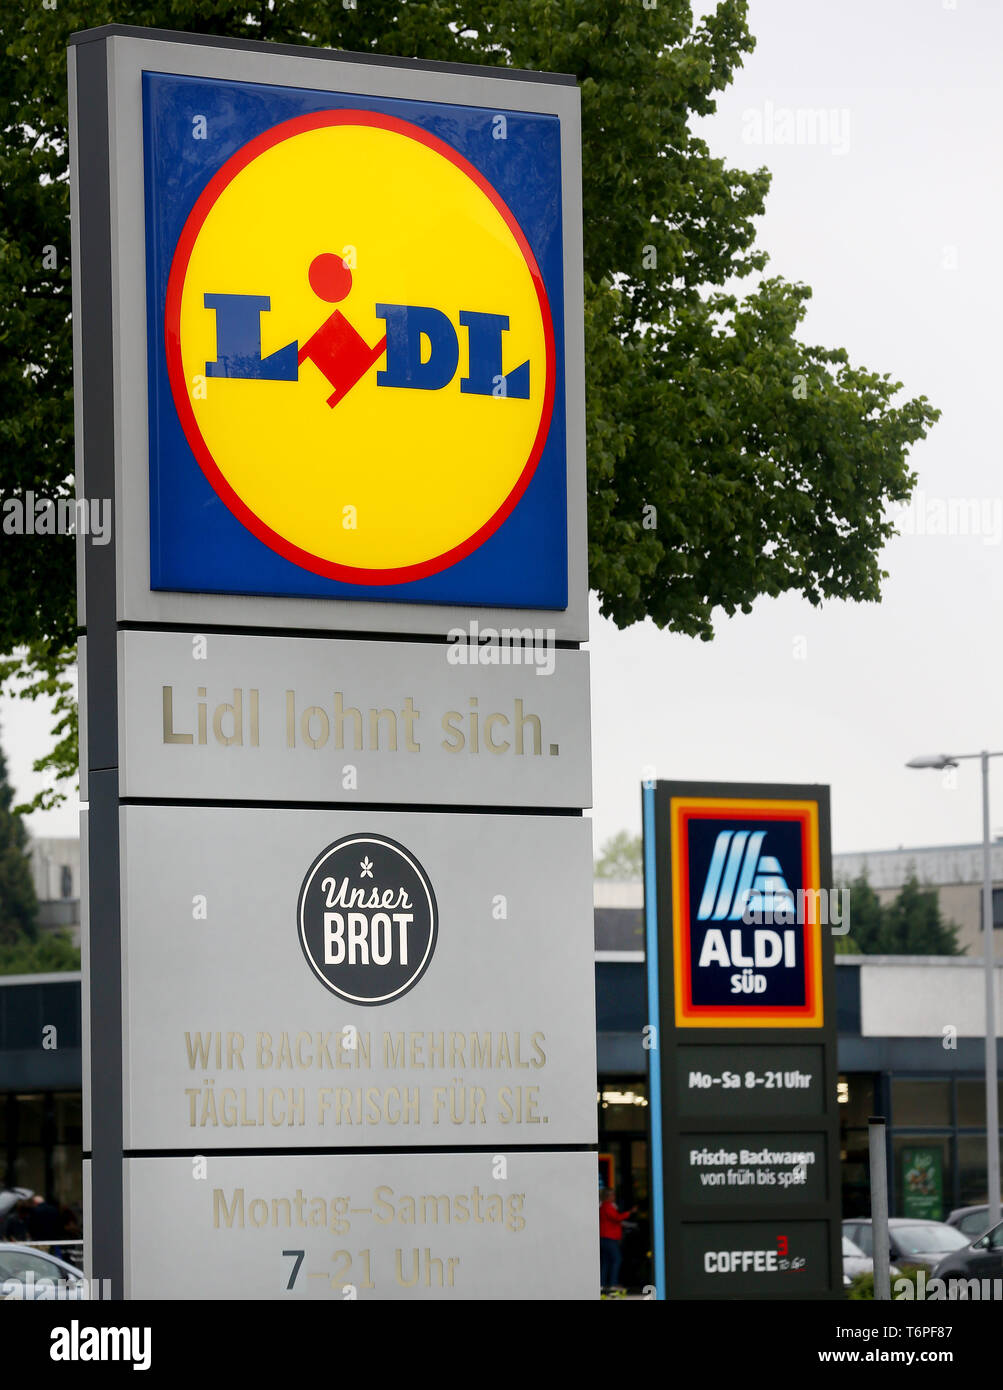 02 May 2019, North Rhine-Westphalia, Mülheim: An advertising board of a  Lidl branch stands opposite an advertising board of Aldi Süd. Photo: Roland  Weihrauch/dpa Stock Photo - Alamy